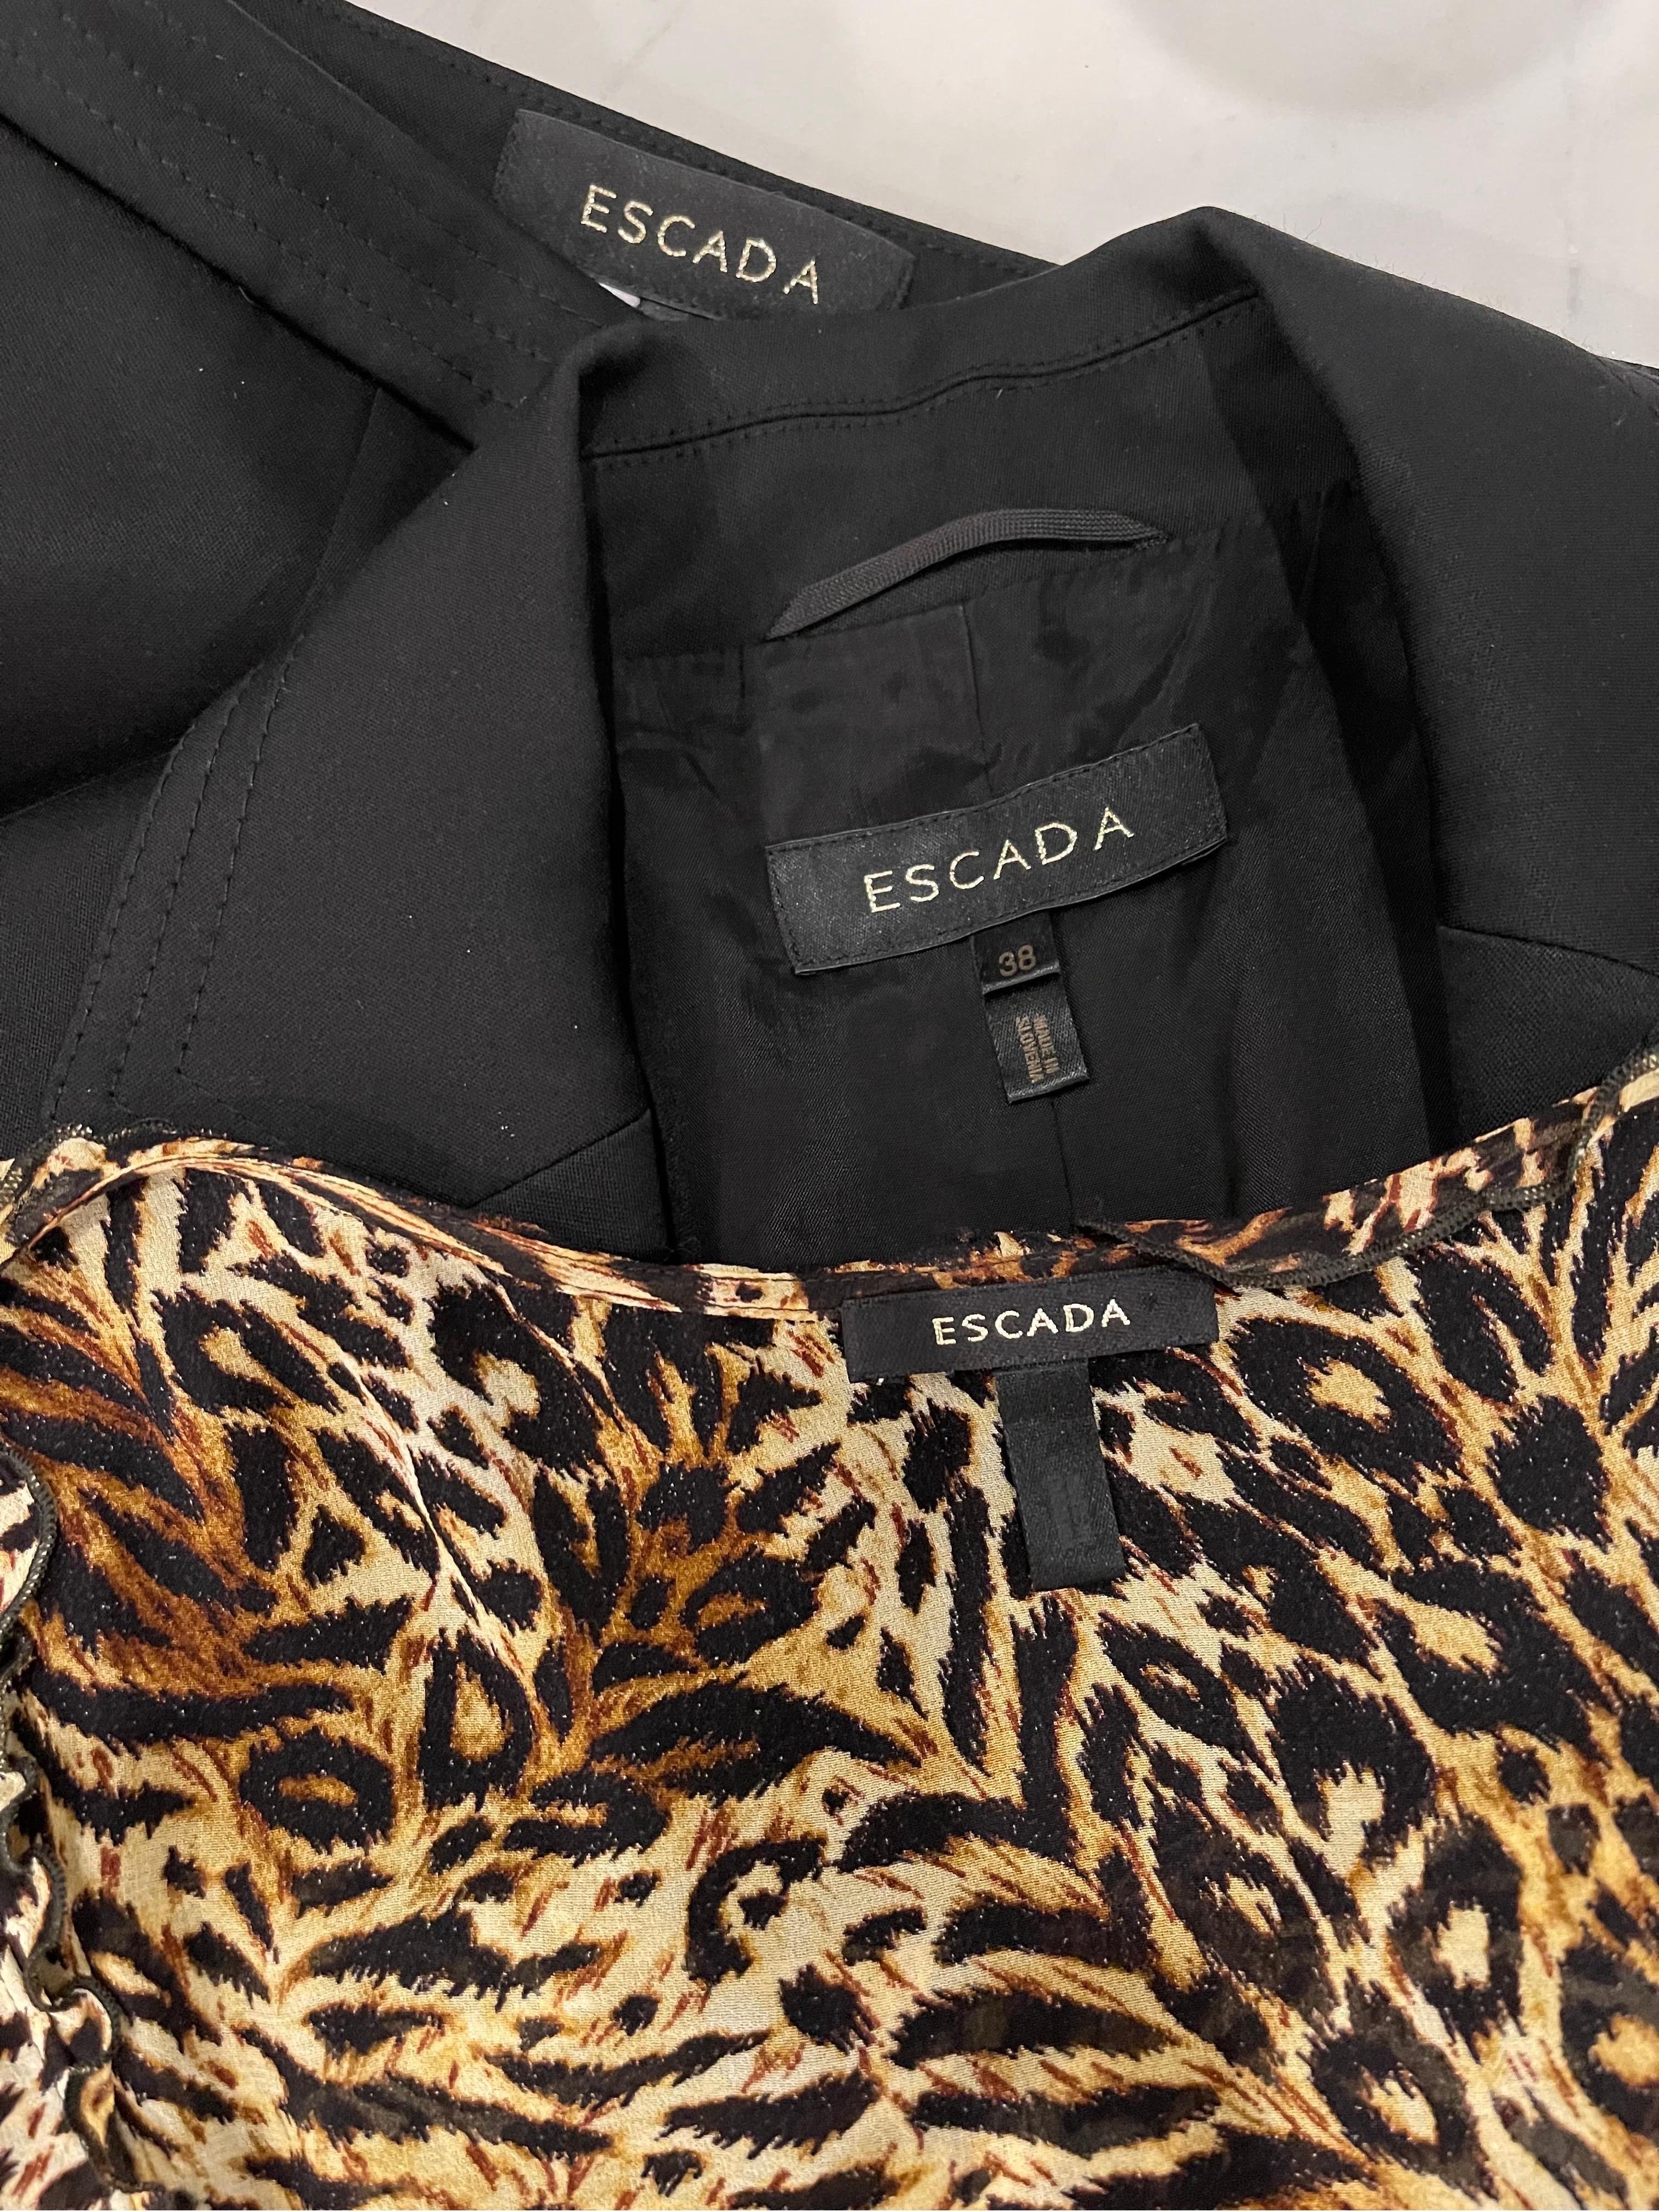 Amazing early 2000s vintage ESCADA 3 piece ensemble ! Features a tailored black jacket with leopard lining and an attached leopard chiffon tie at waist. Sleeveless leopard chiffon blouse. Flare leg trousers also feature leopard chiffon panels on the